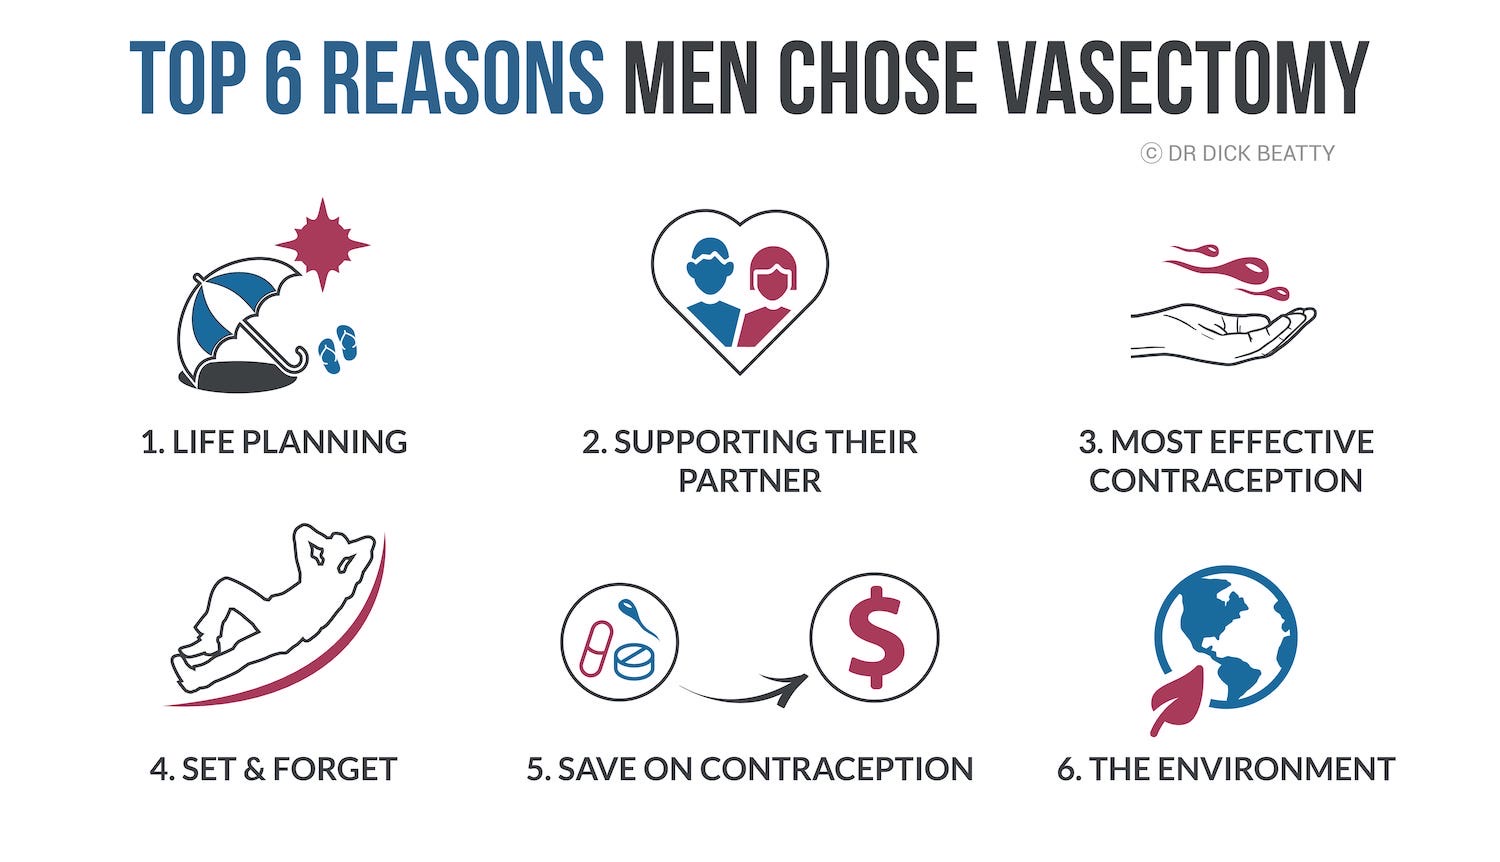 Six reasons why men or couples chose vasectomy as their choice of contraception: life planning, supporting their partner, effectiveness, set and forget, price, the environment